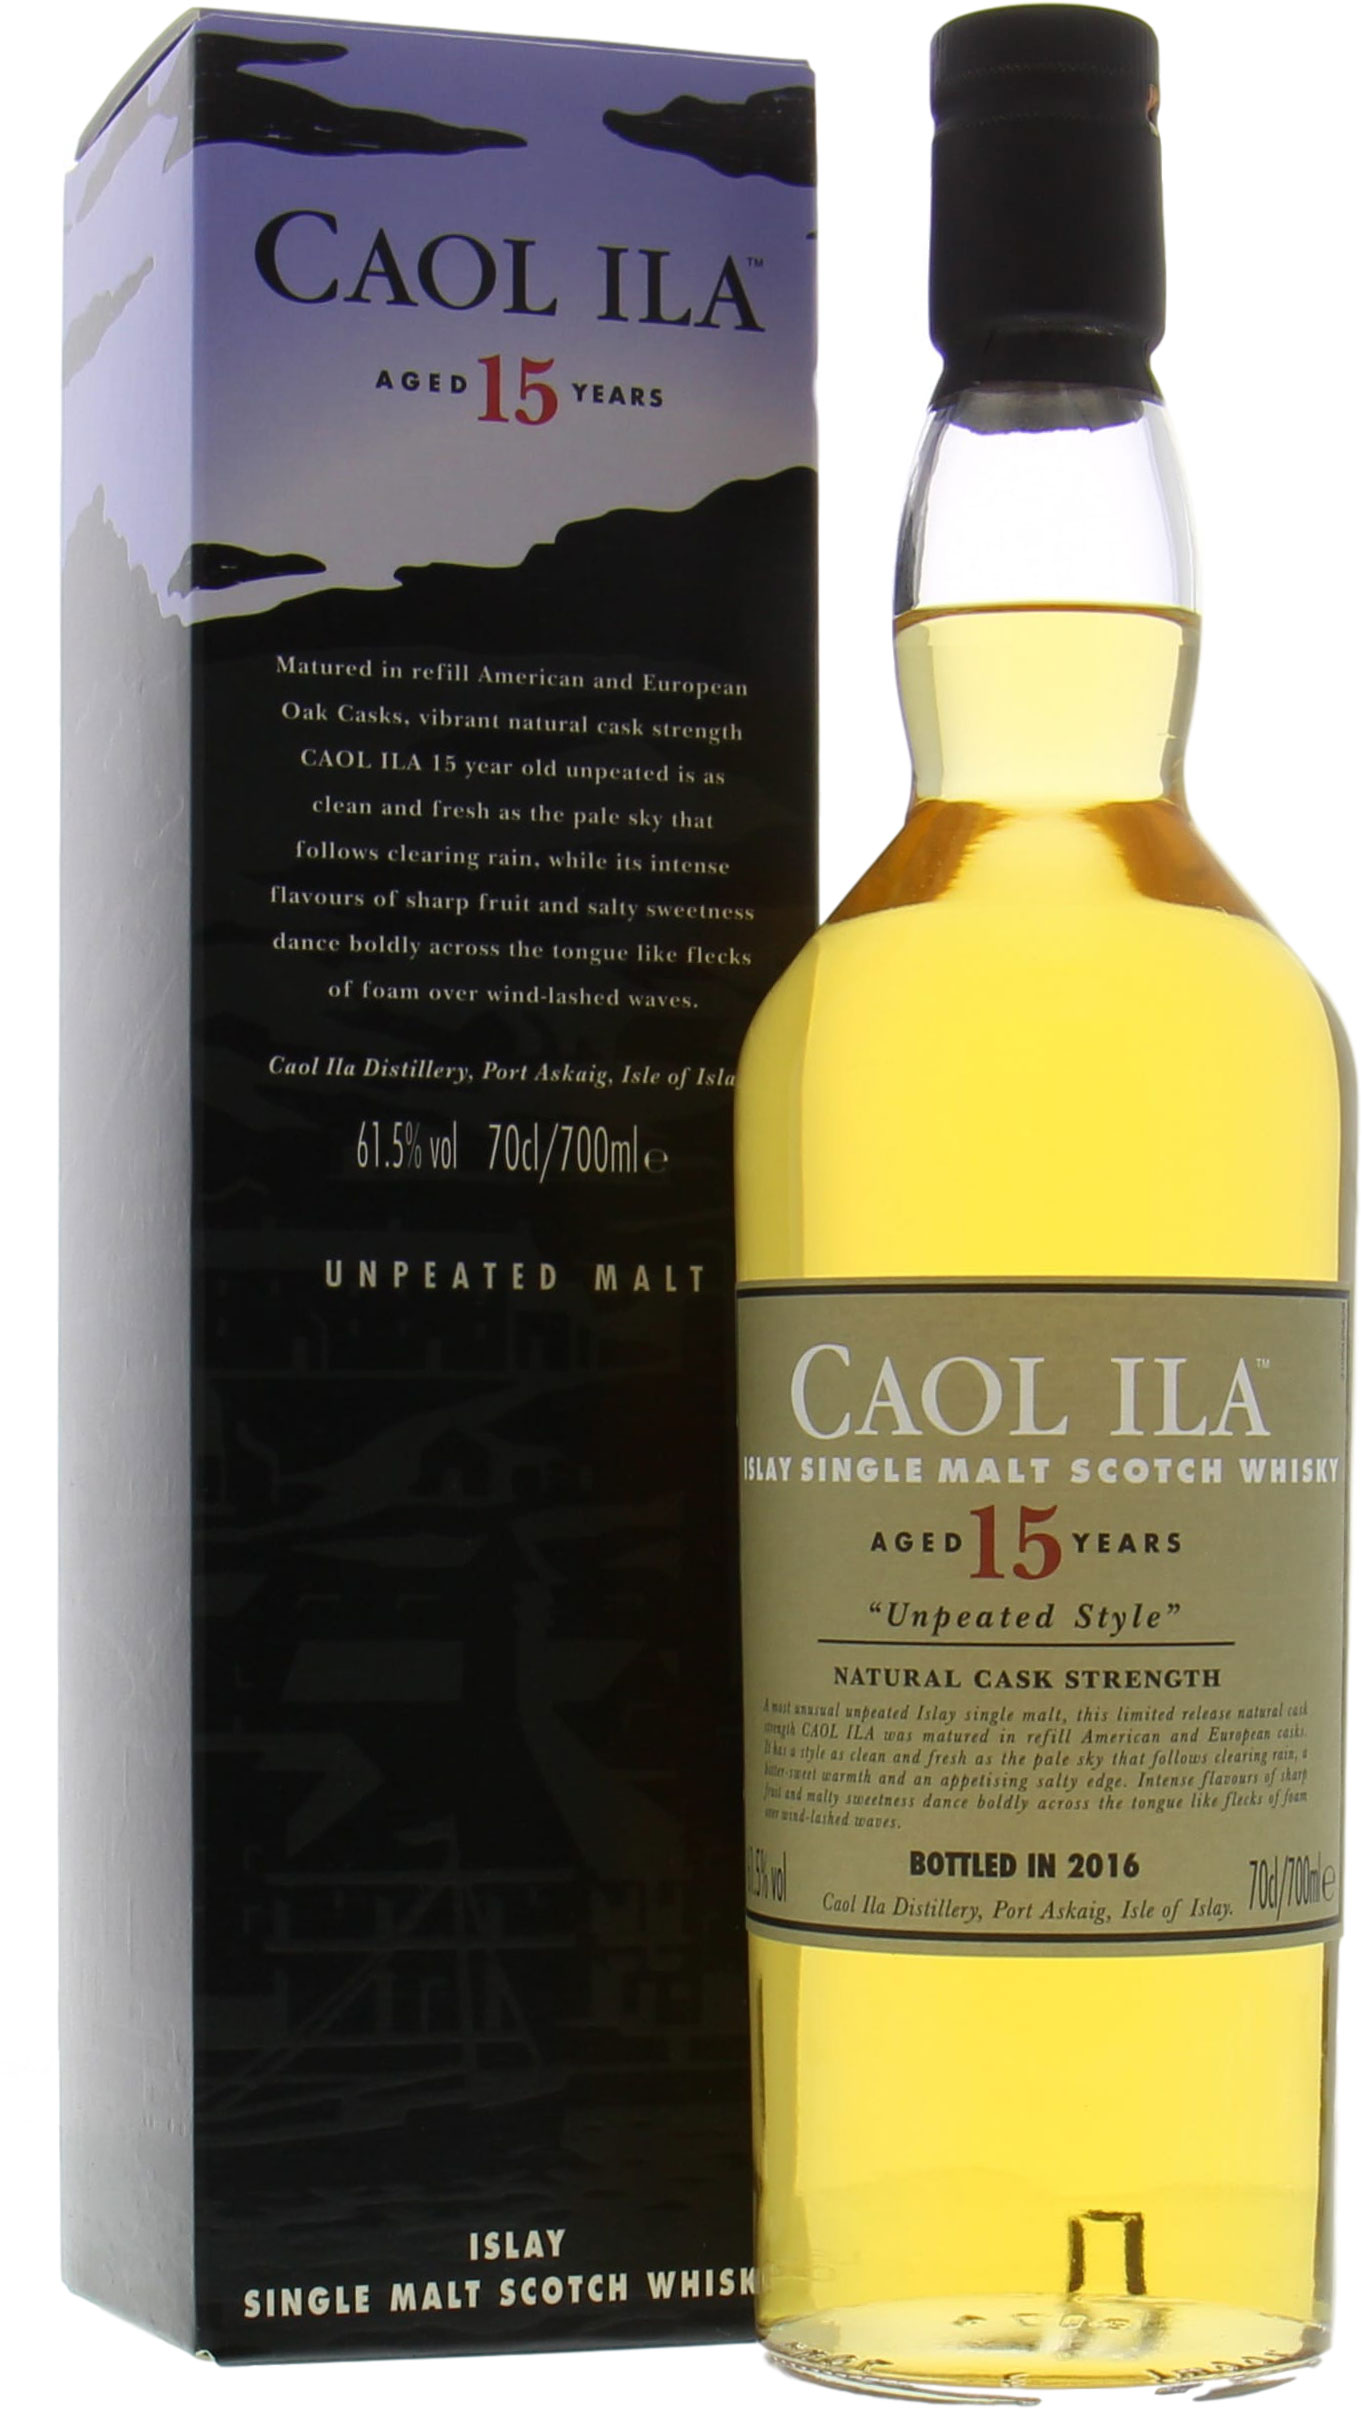 Caol Ila - 15 Years Old Unpeated Style Special Release 2016 61.5% nv